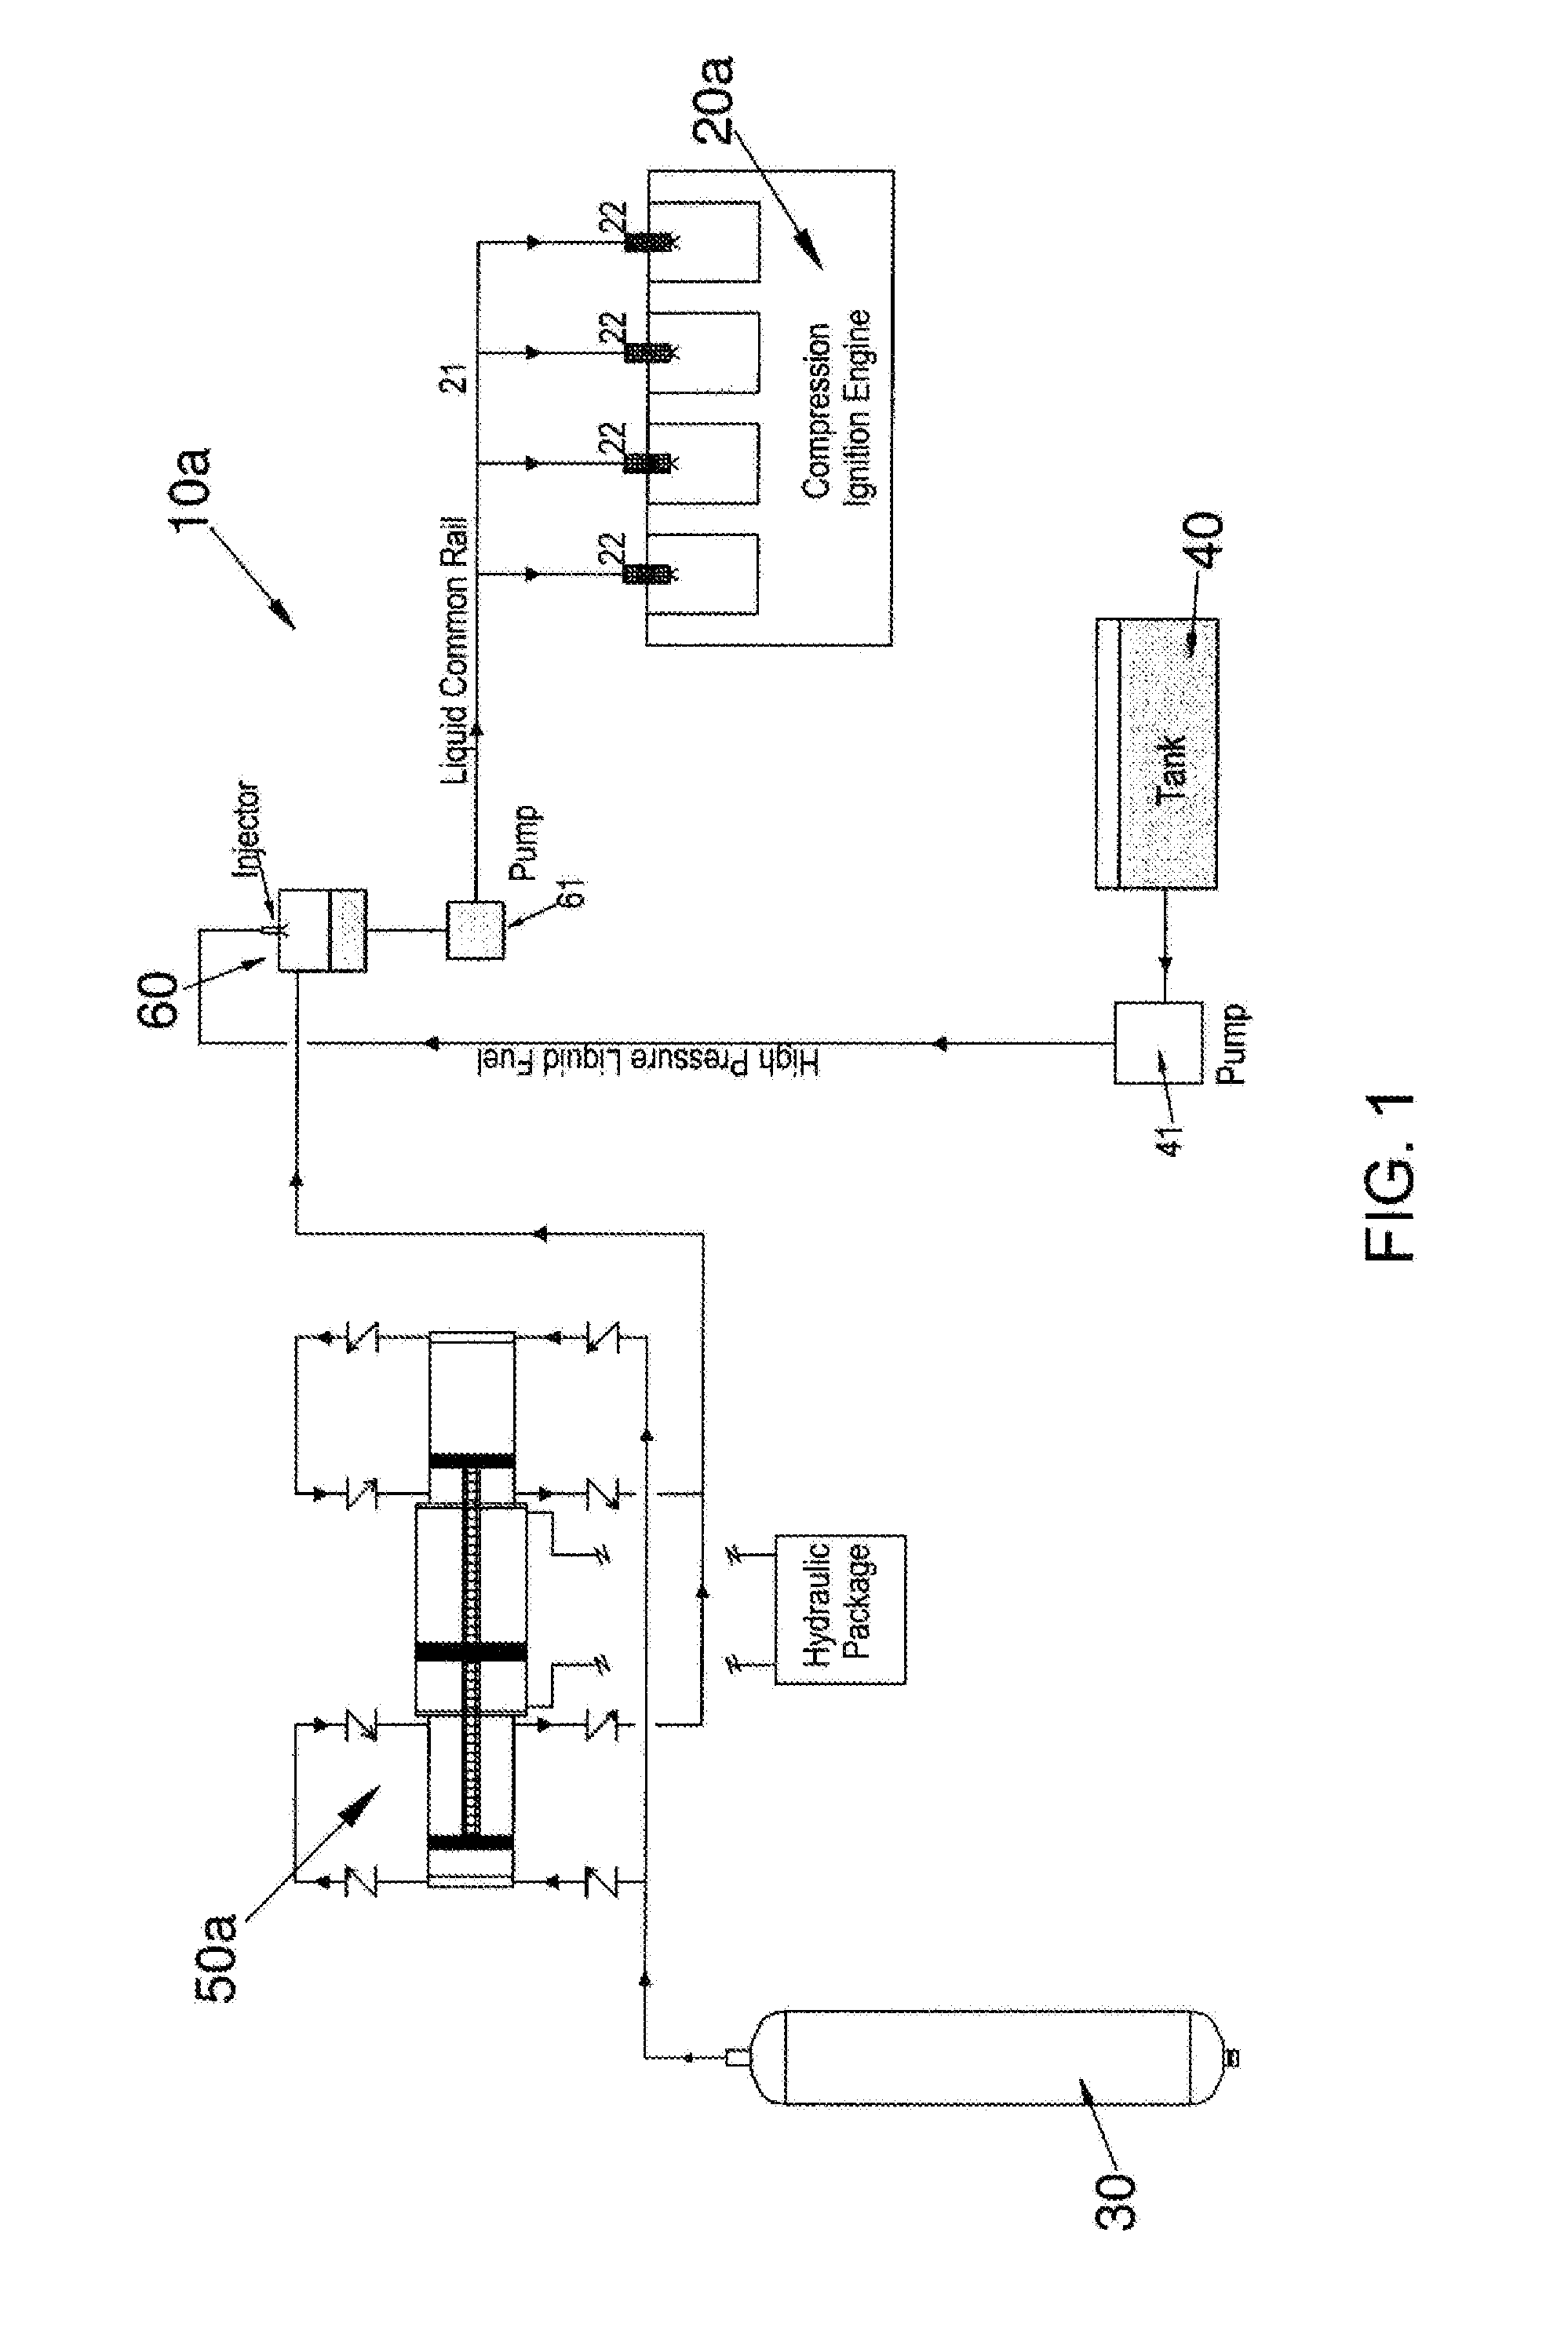 Vehicle fuel system